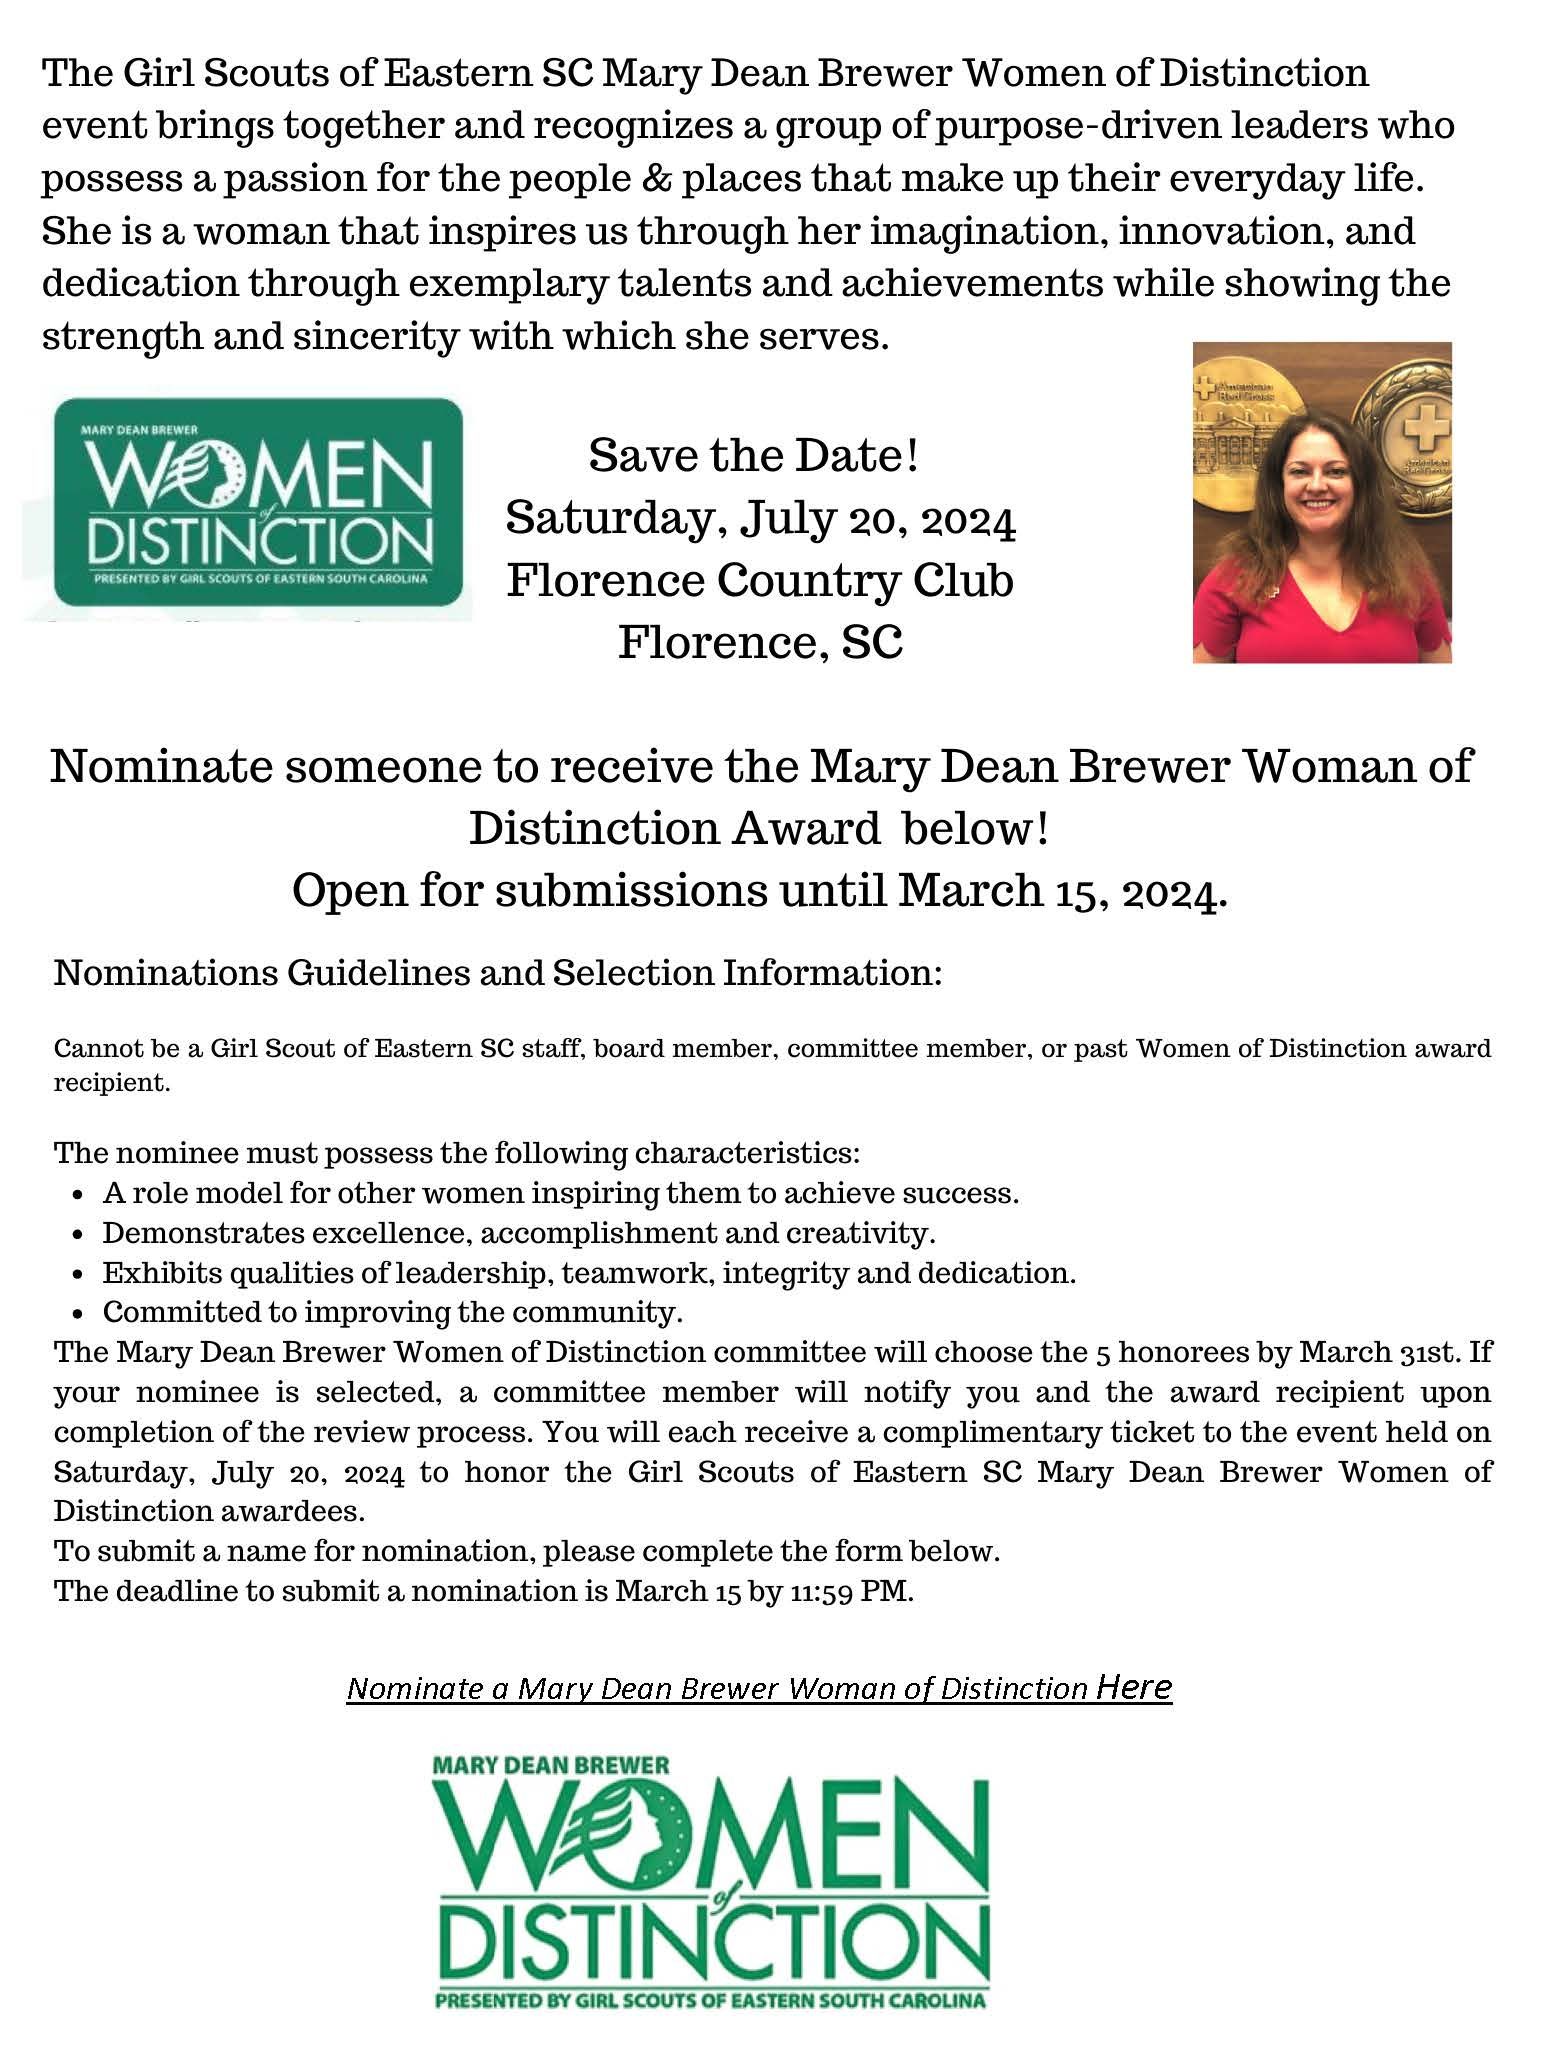 Mary Dean Brewer Woman of Distinction 2024